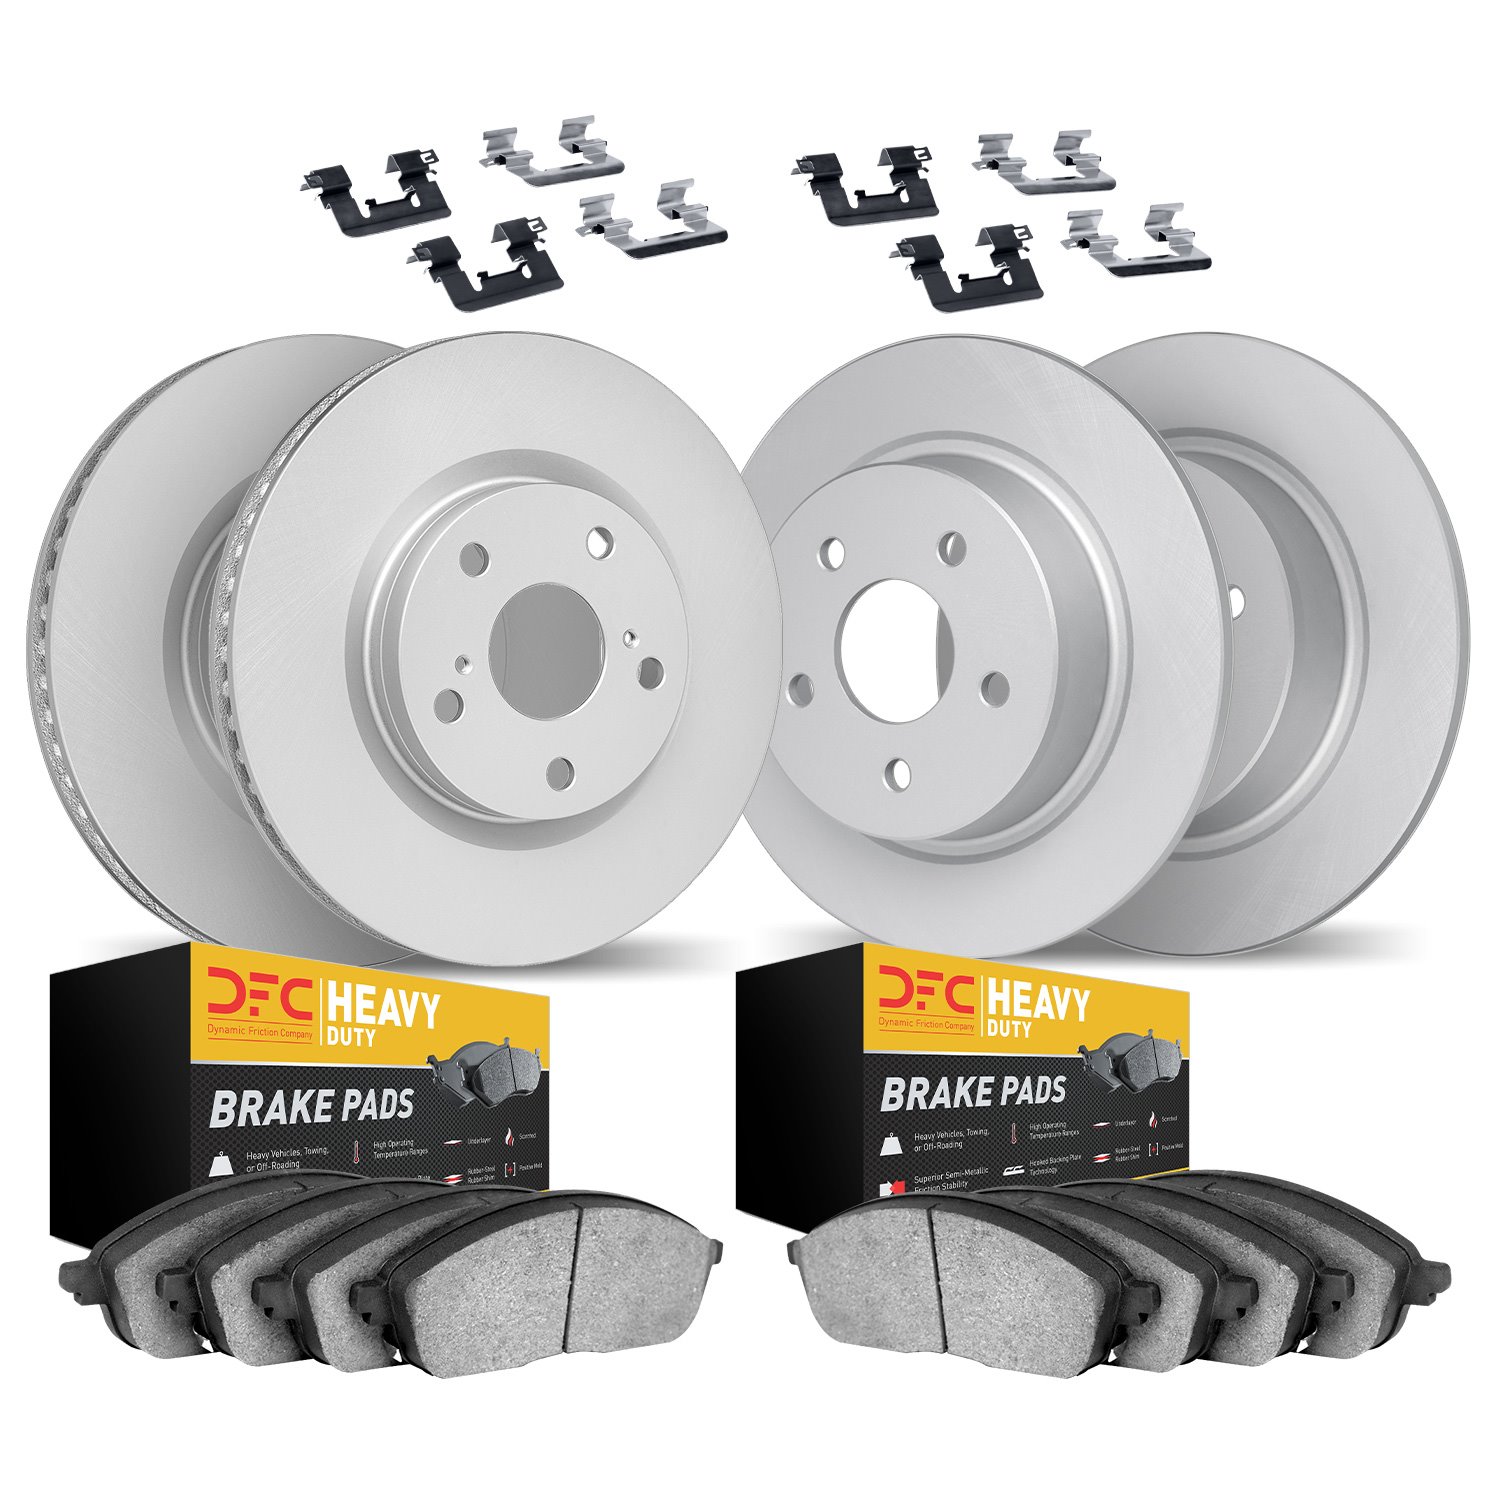 4214-54123 Geospec Brake Rotors w/Heavy-Duty Brake Pads & Hardware, 2001-2002 Ford/Lincoln/Mercury/Mazda, Position: Front and Re